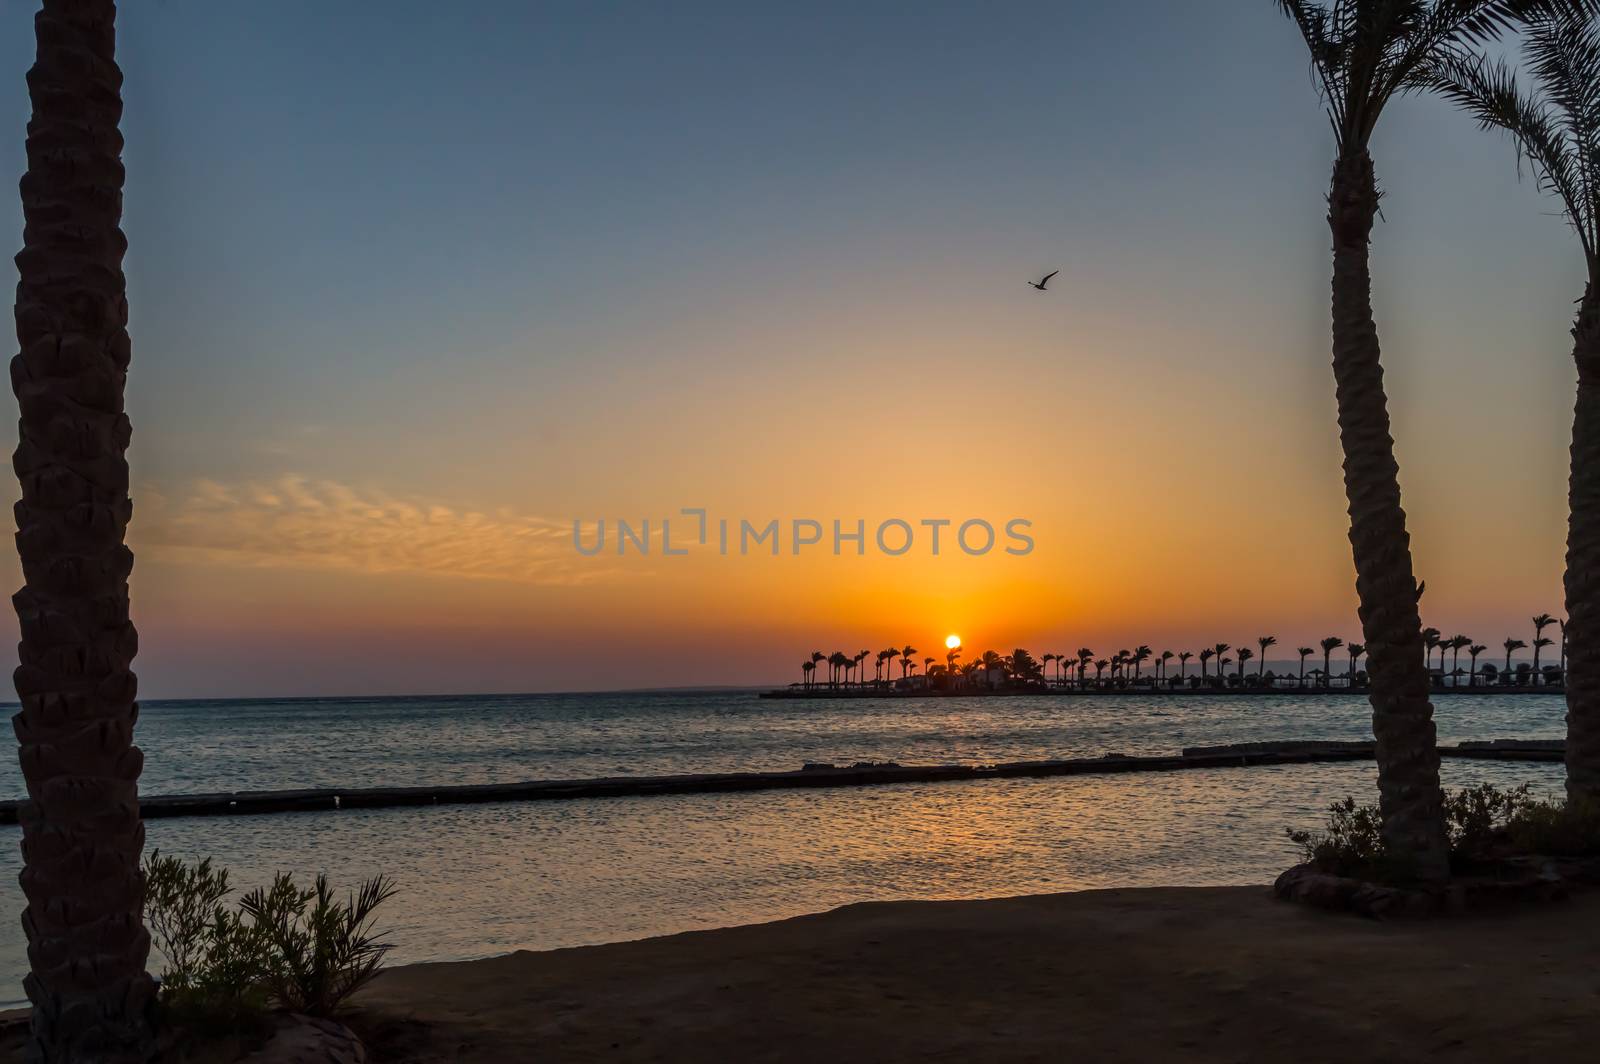 Sunrise on a peninsula of Hurghada across a row of palm trees  by Philou1000